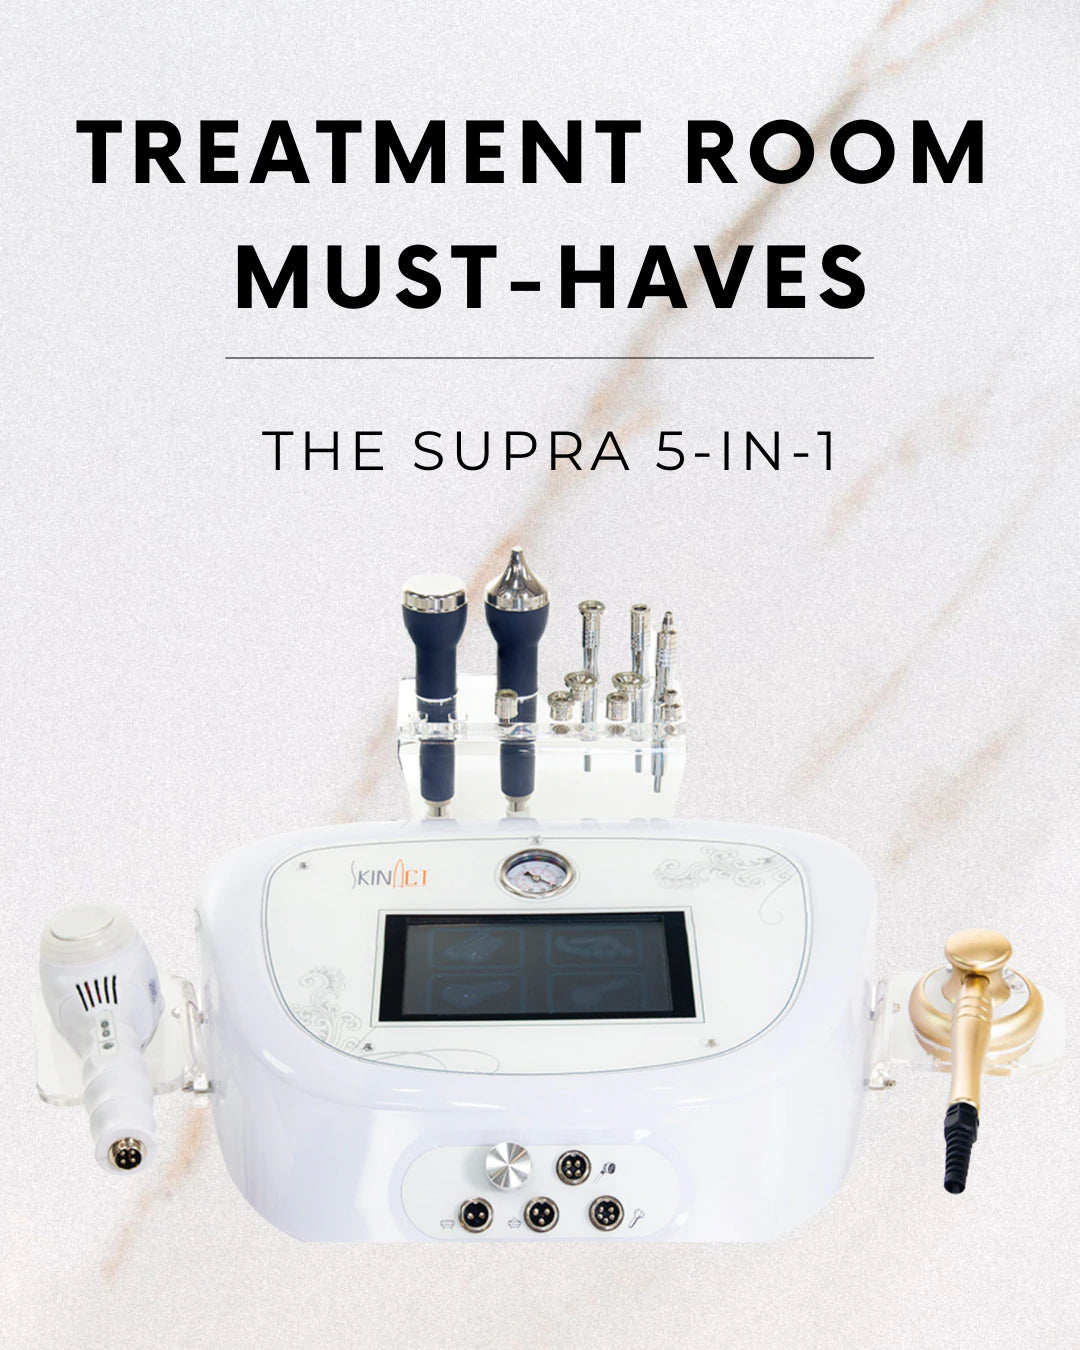 Treatment Room Must-Haves: The Supra 5-In-1